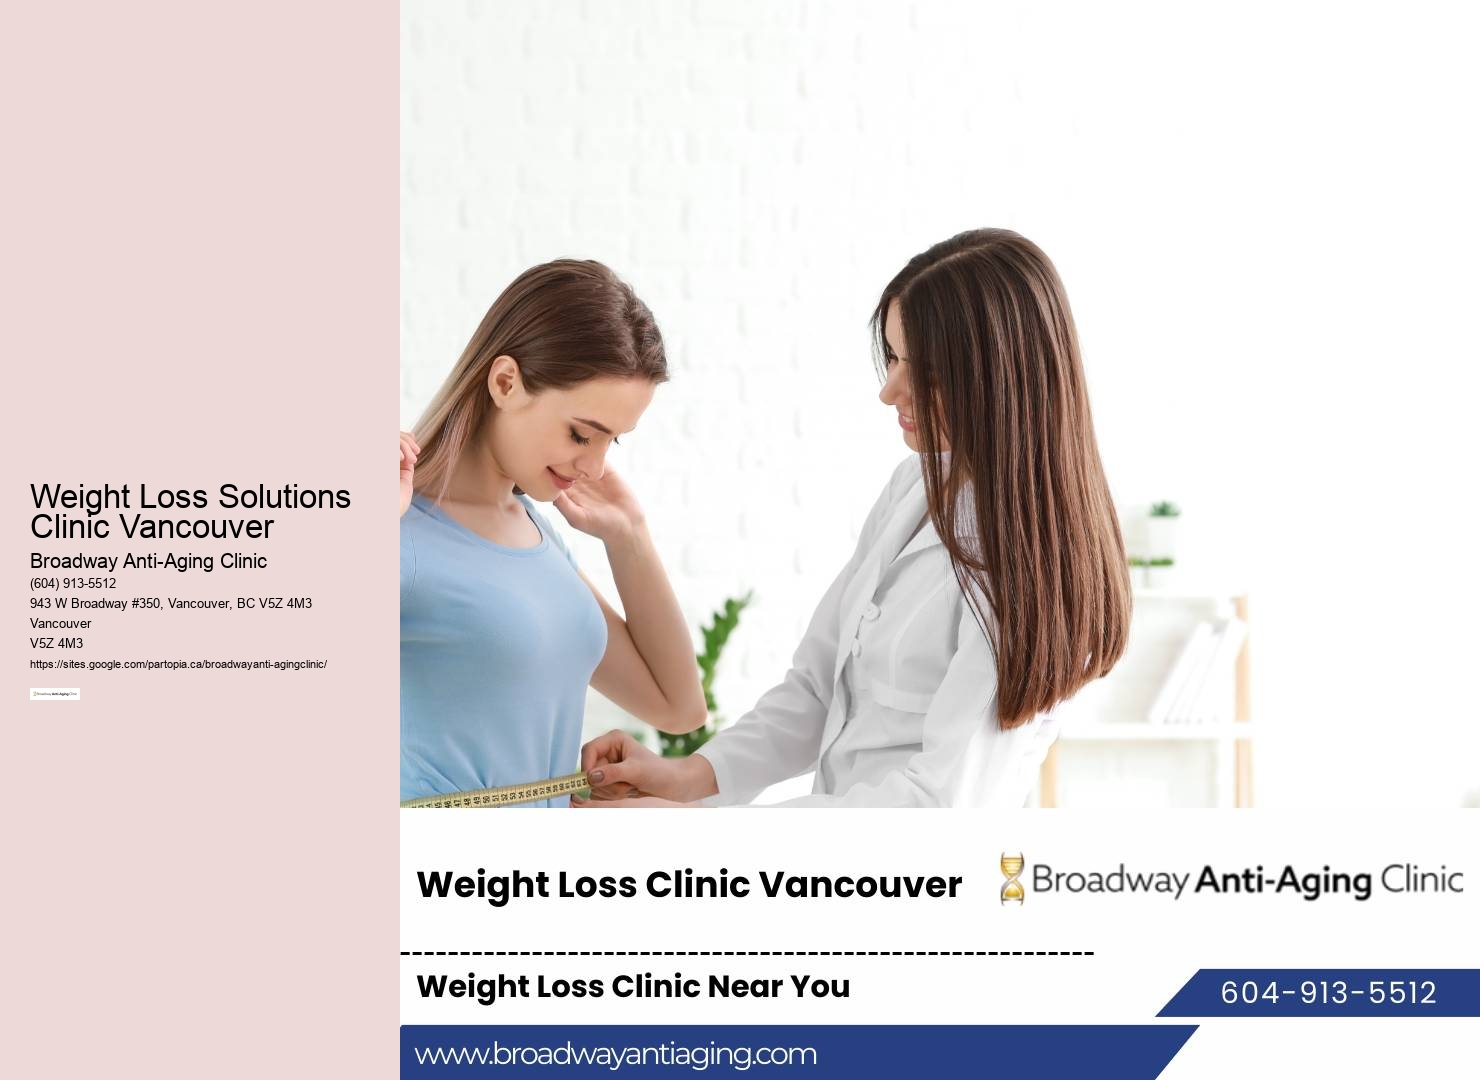 Revolution medical clinic Vancouver near me